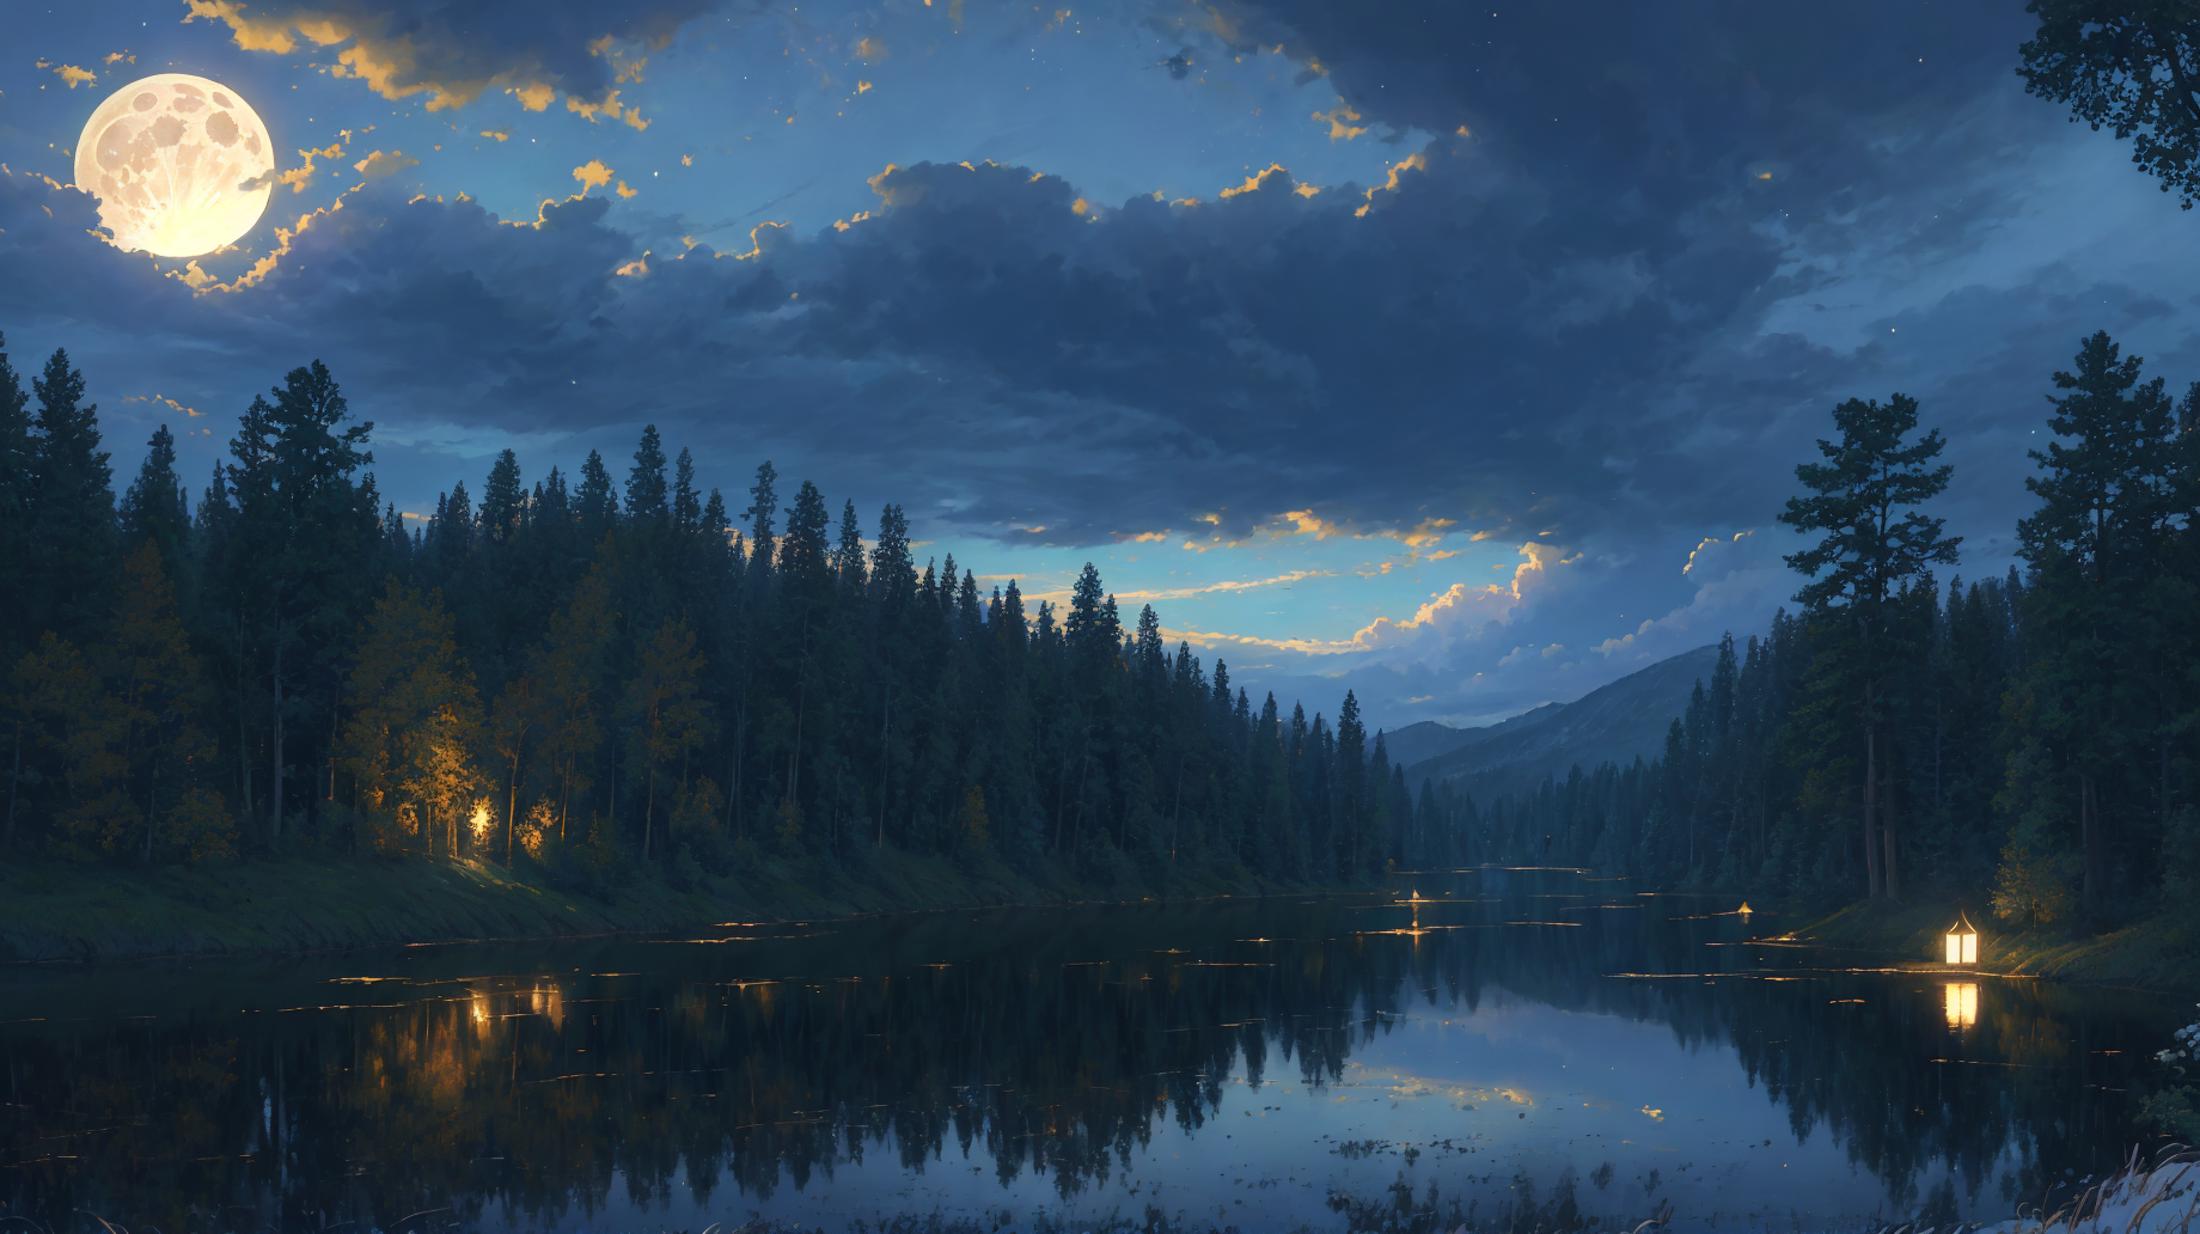 A serene forest and lake scene at dusk, with blue skies and clouds above.